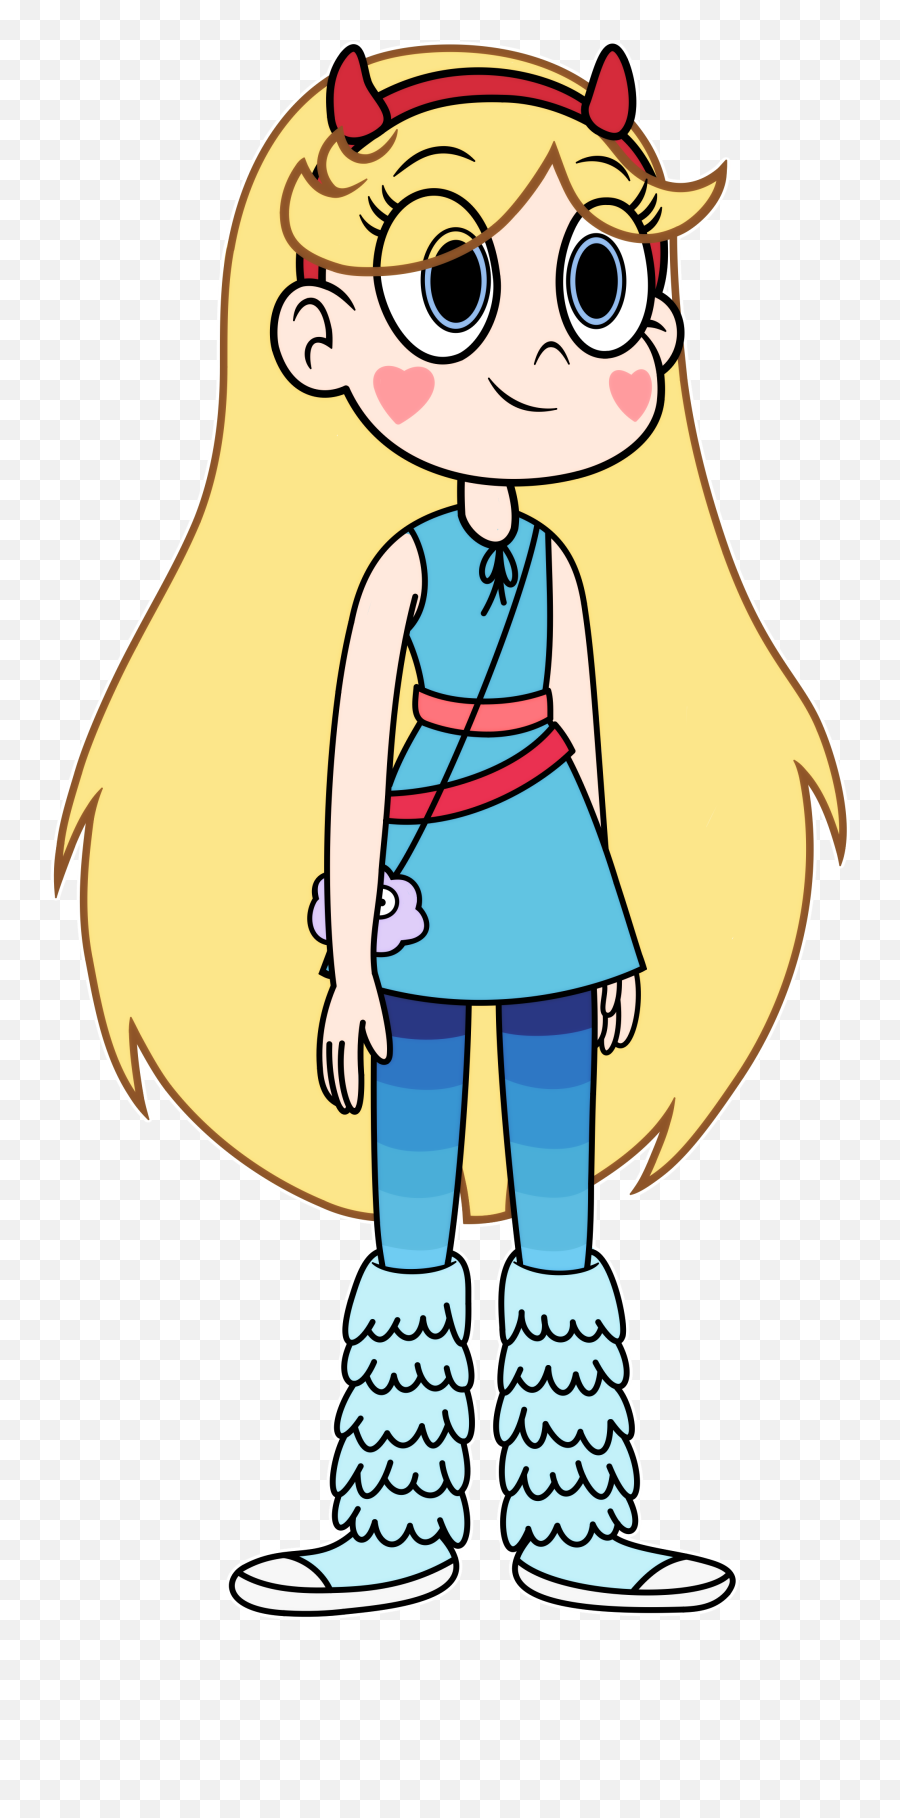 Star Butterfly Canonplozalcachaz Character Stats And Emoji,Cannon Theory Of Emotion